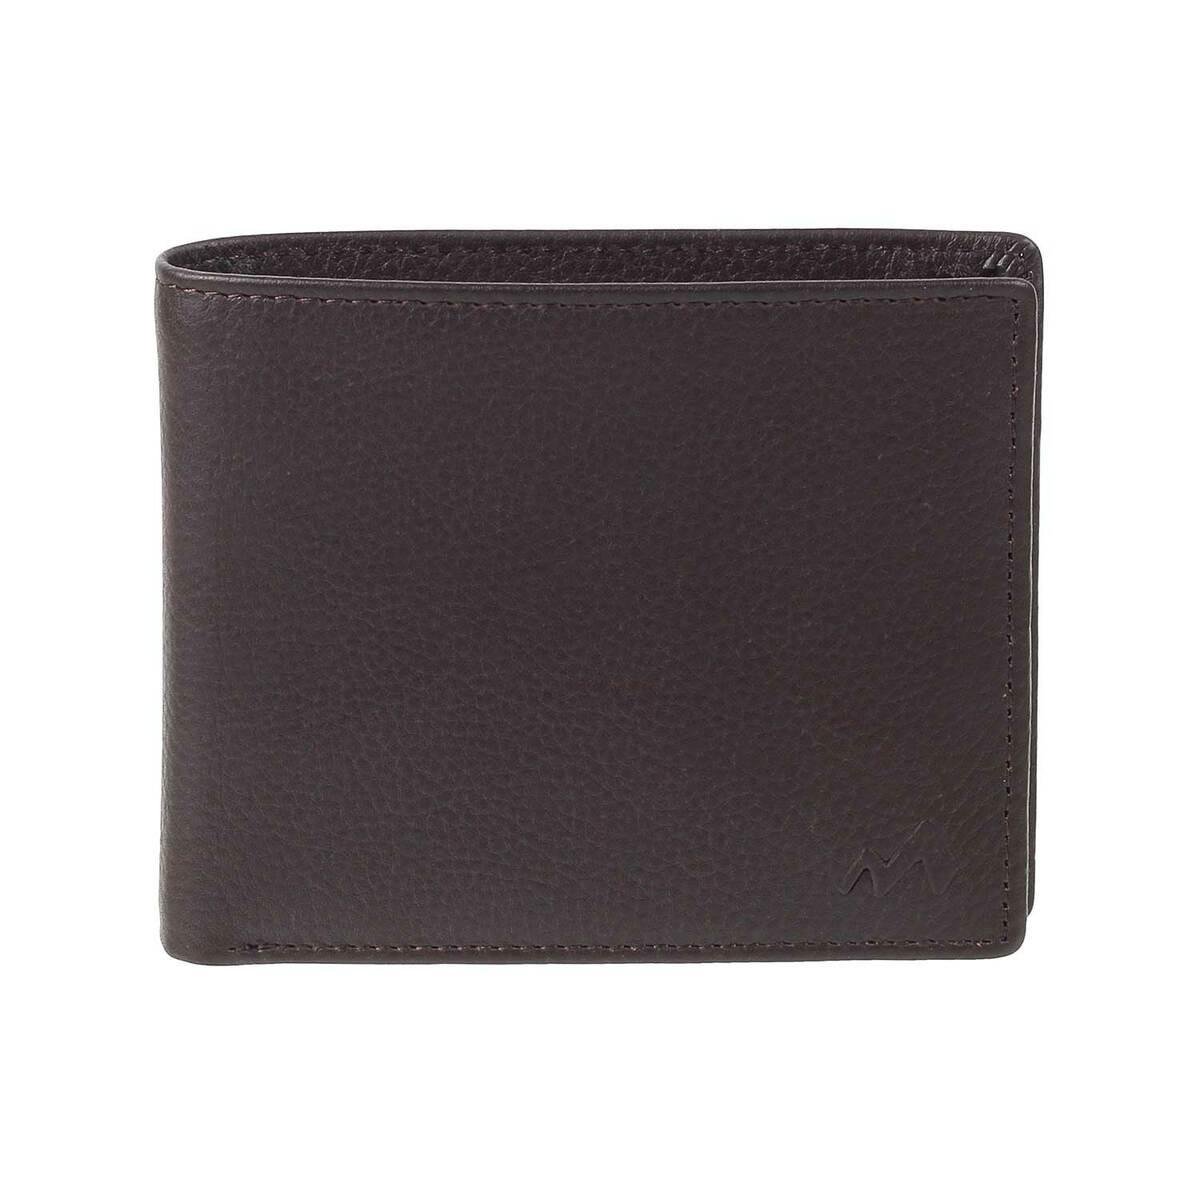 Textured Leather Wallet | Buy Textured Wallets online | Massi Miliano